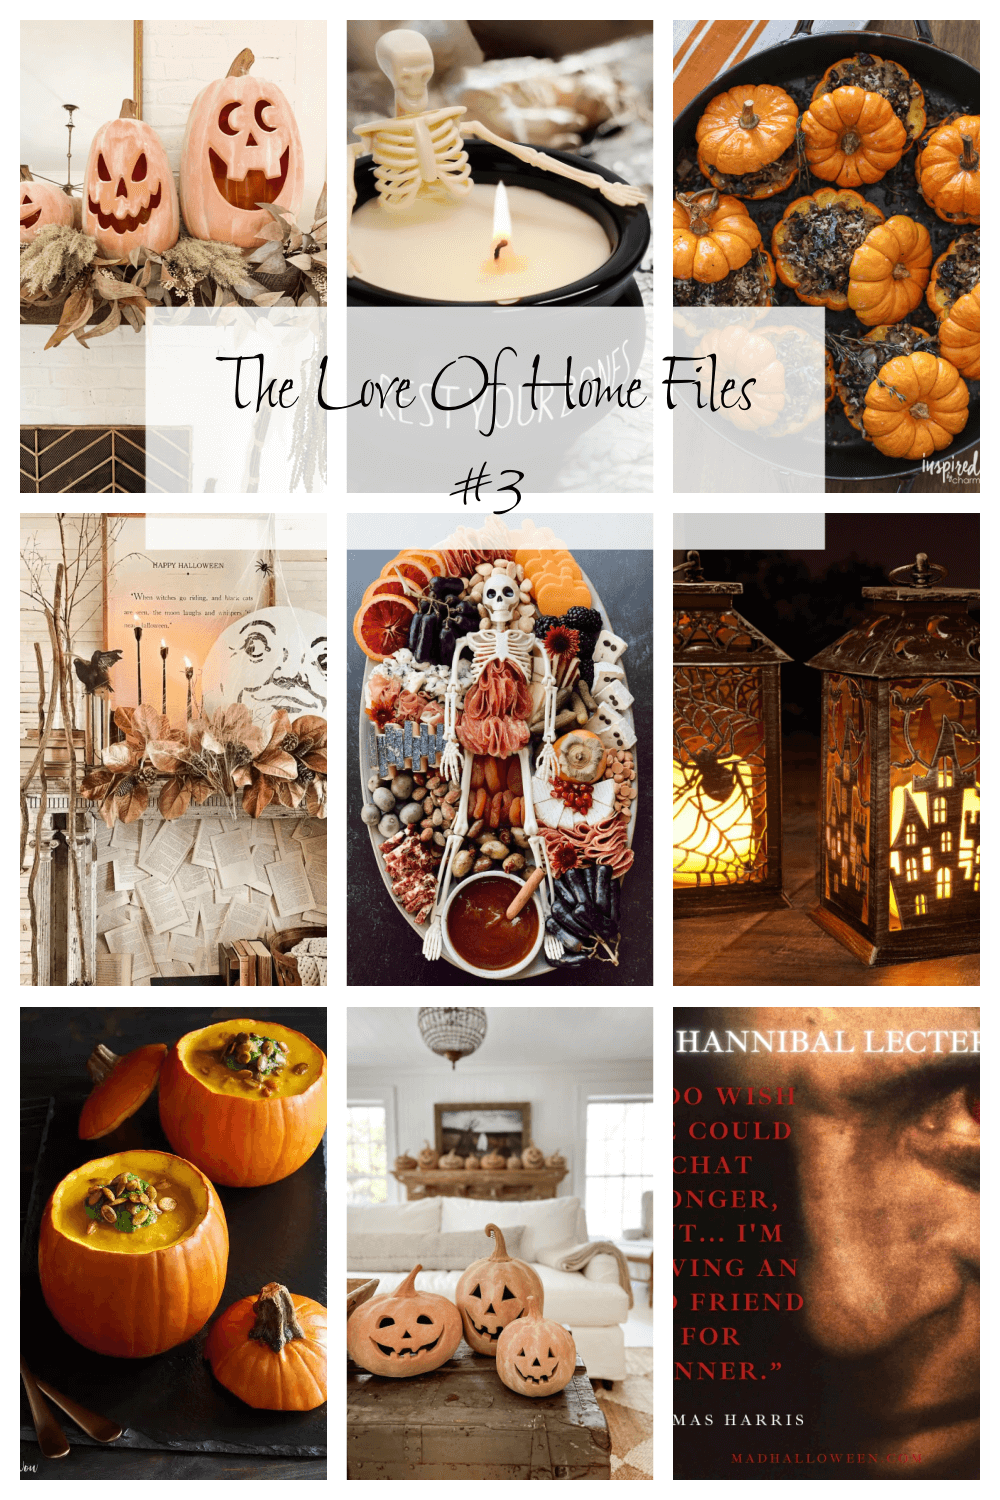 The Love Of Home Files #3: Halloween